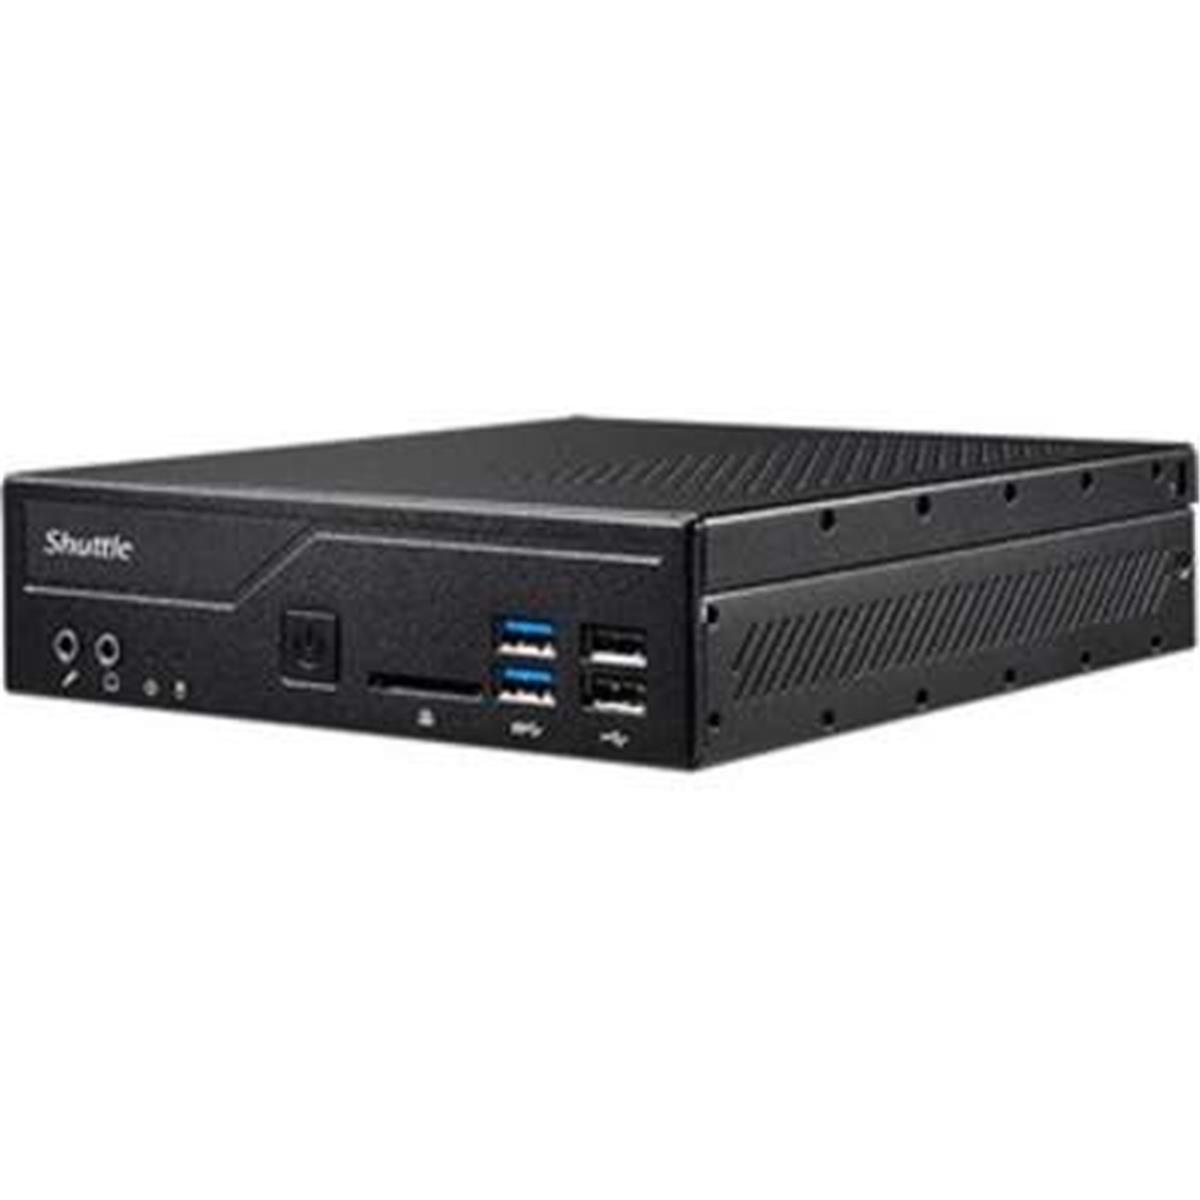 Picture of Shuttle DH410S 1.3L Chassis Ci3 i5 i7 i9 H470 DDR4 Max 64GB HDMI DP Barebone System